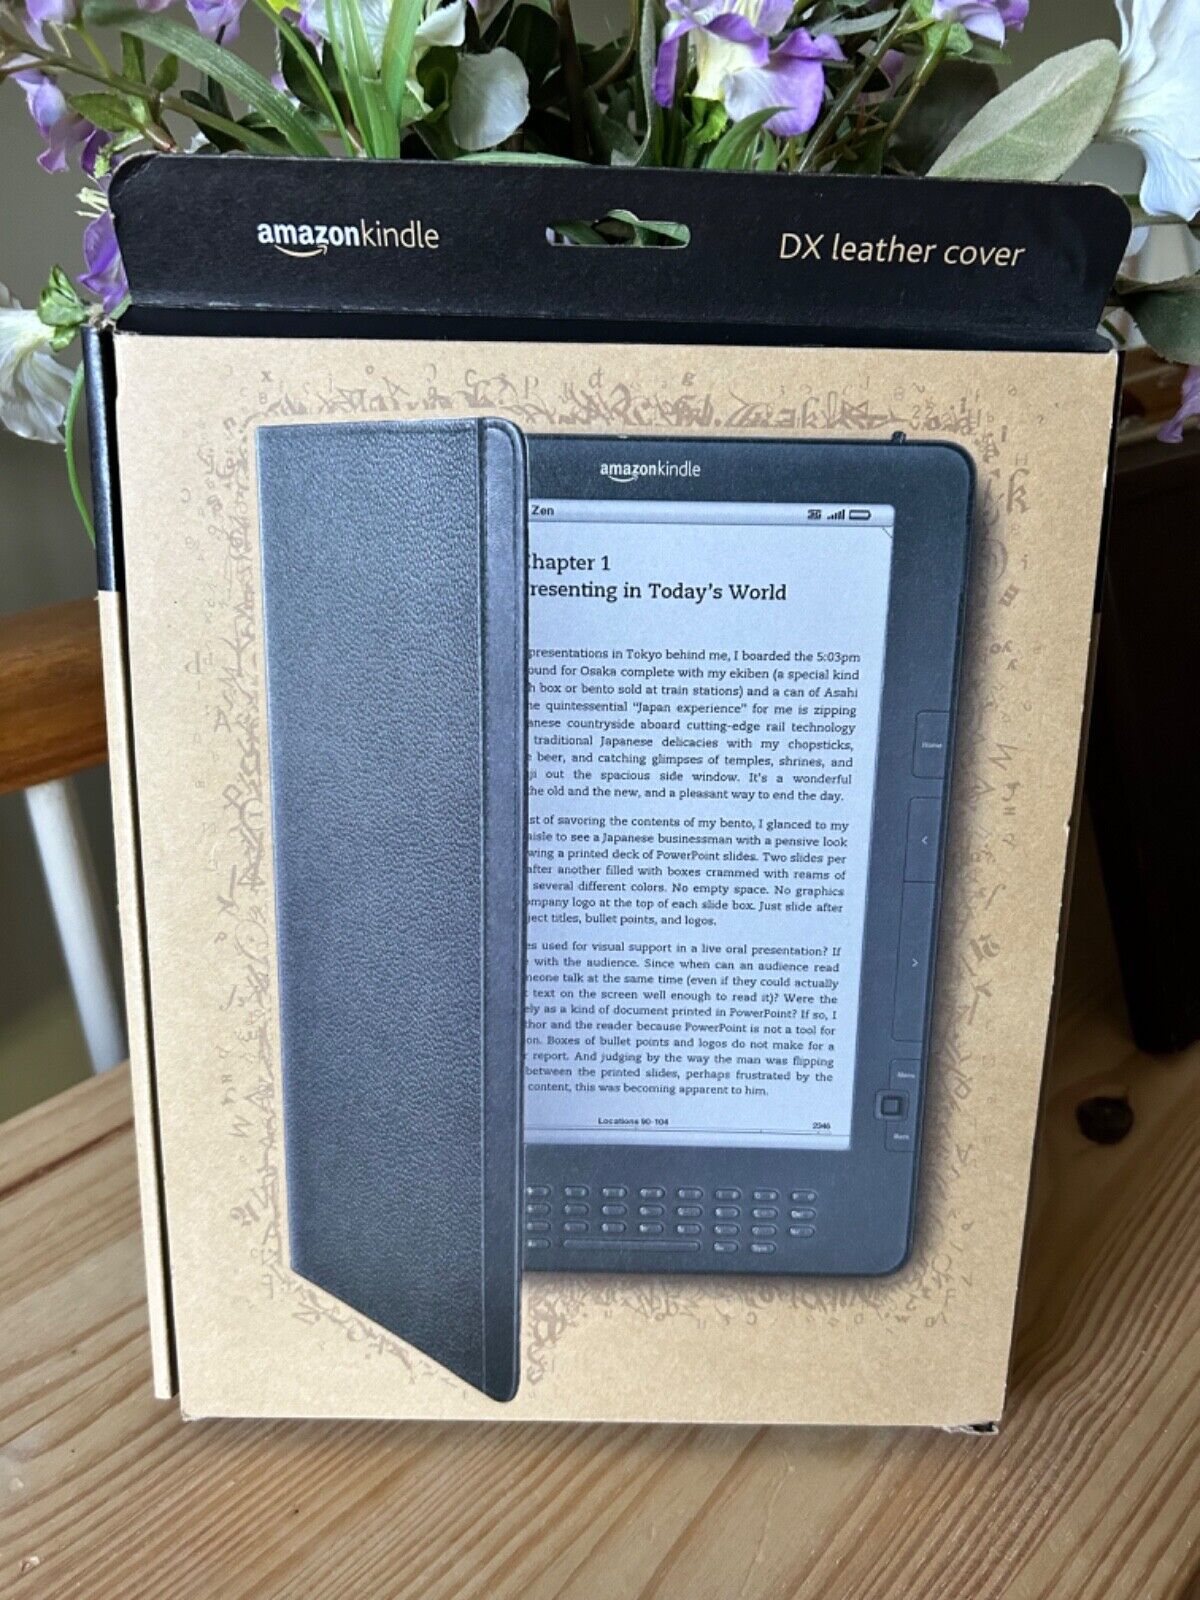 NEW Amazon Genuine Leather Cover for Kindle DX D00801, D00611; Original OEM Case